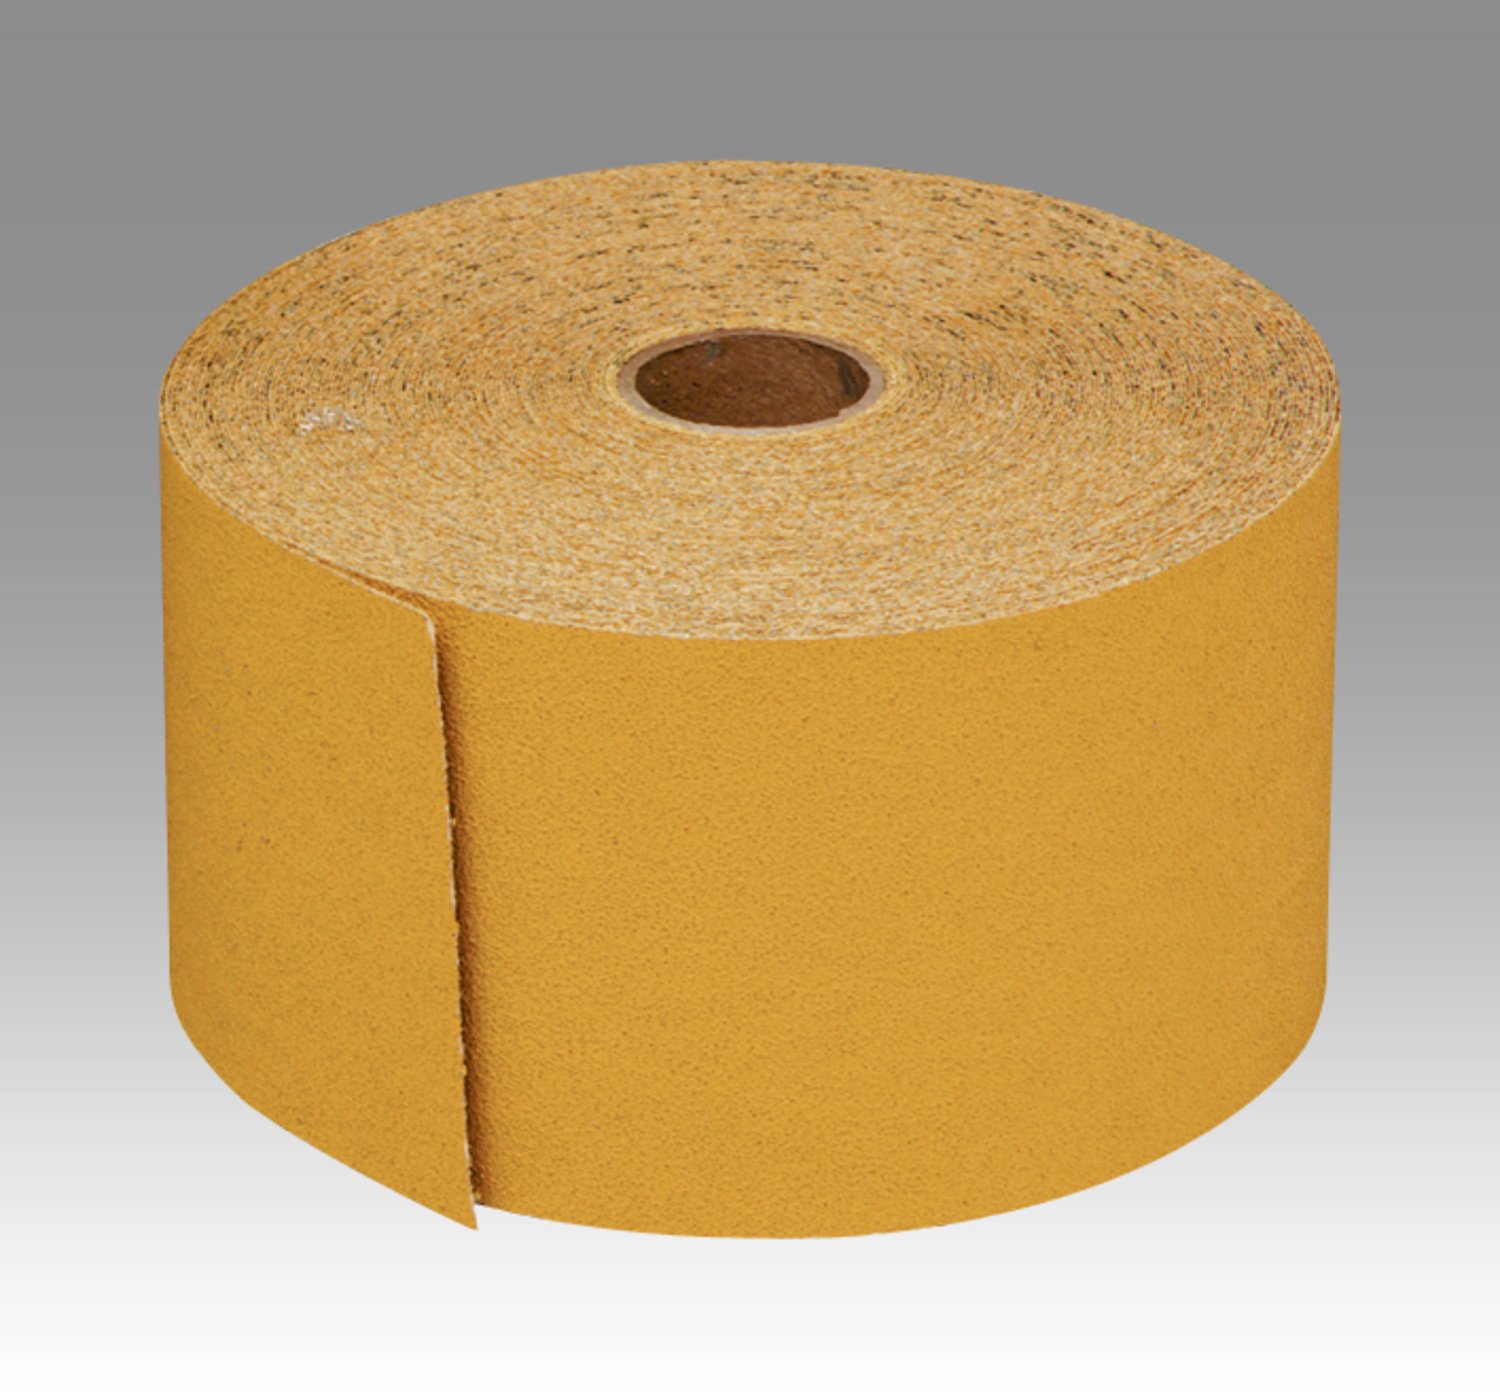 7000119165 - 3M Stikit Gold Paper Sheet Roll 216U, 2-3/4 in x 45 yd P150 A-weight,
10 ea/Case